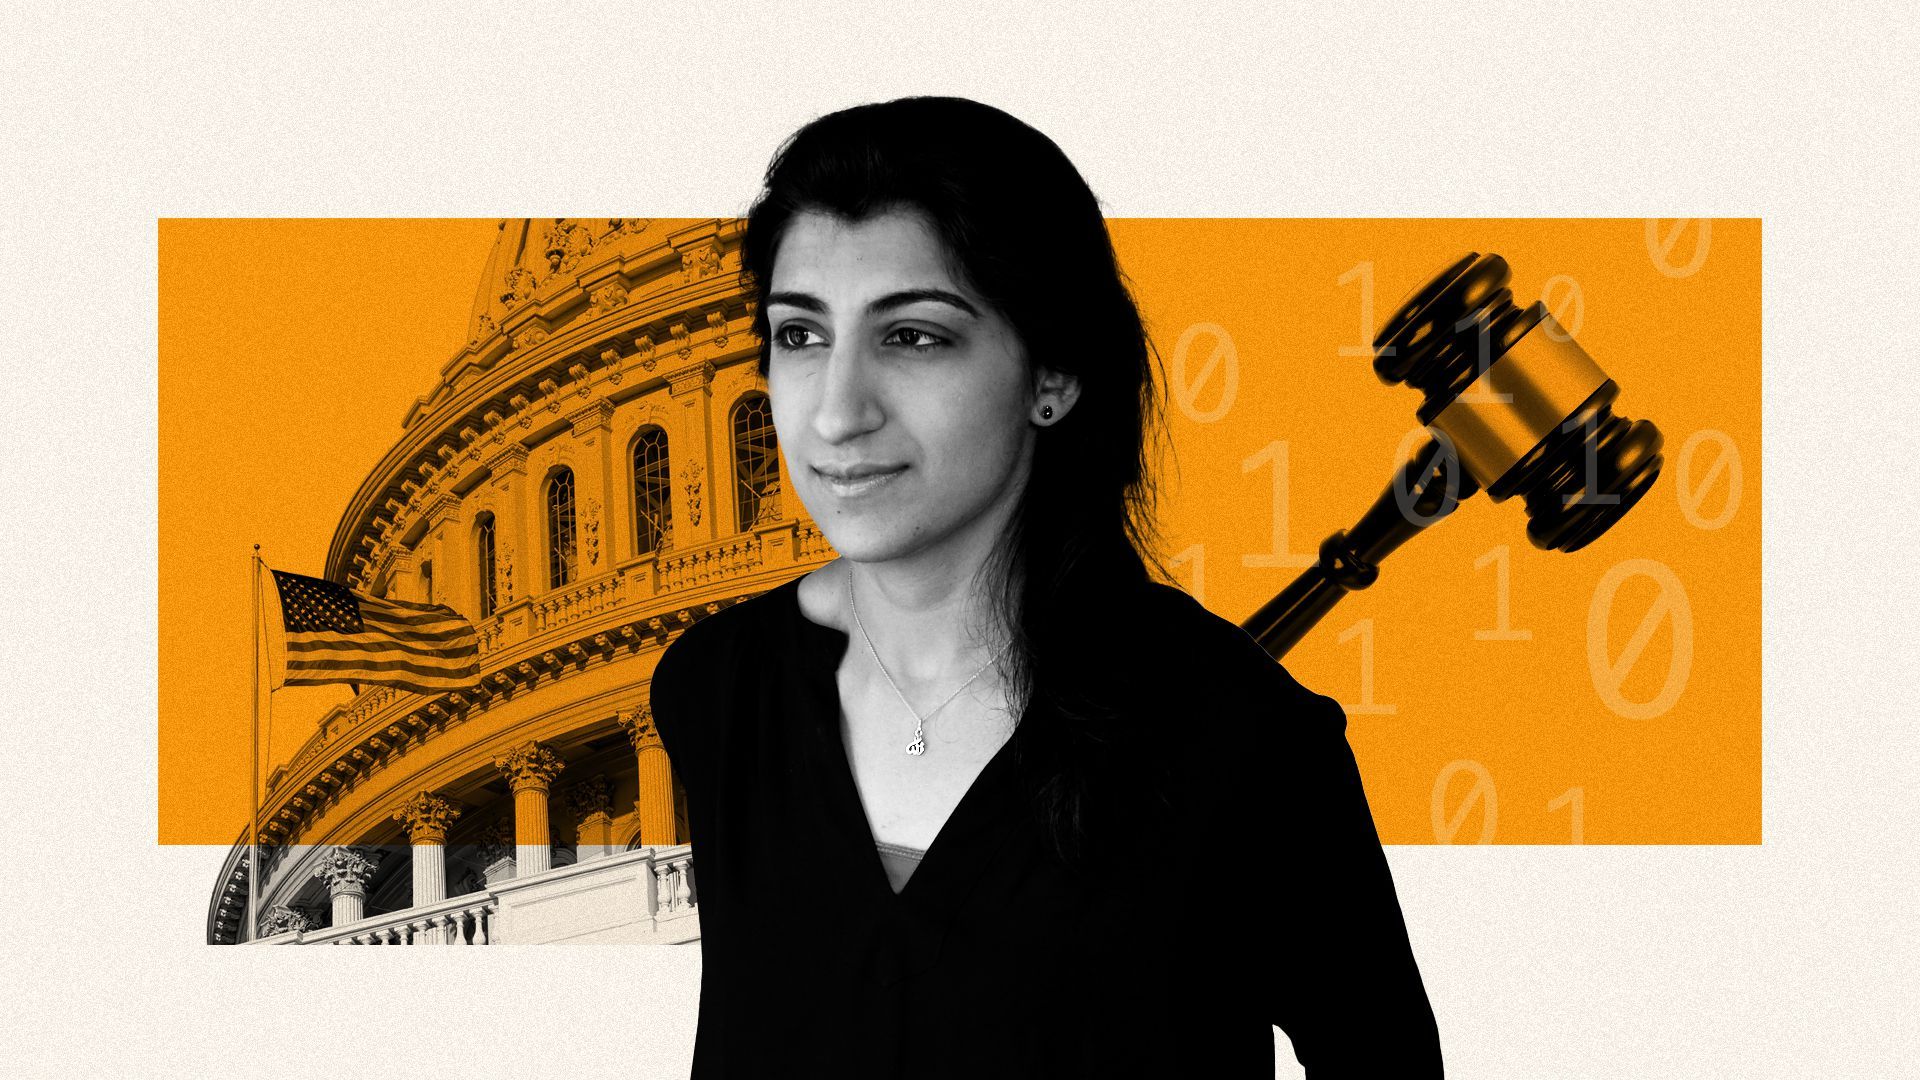 Lina Khan Is Taking on the World's Biggest Tech Companies—and Losing - WSJ